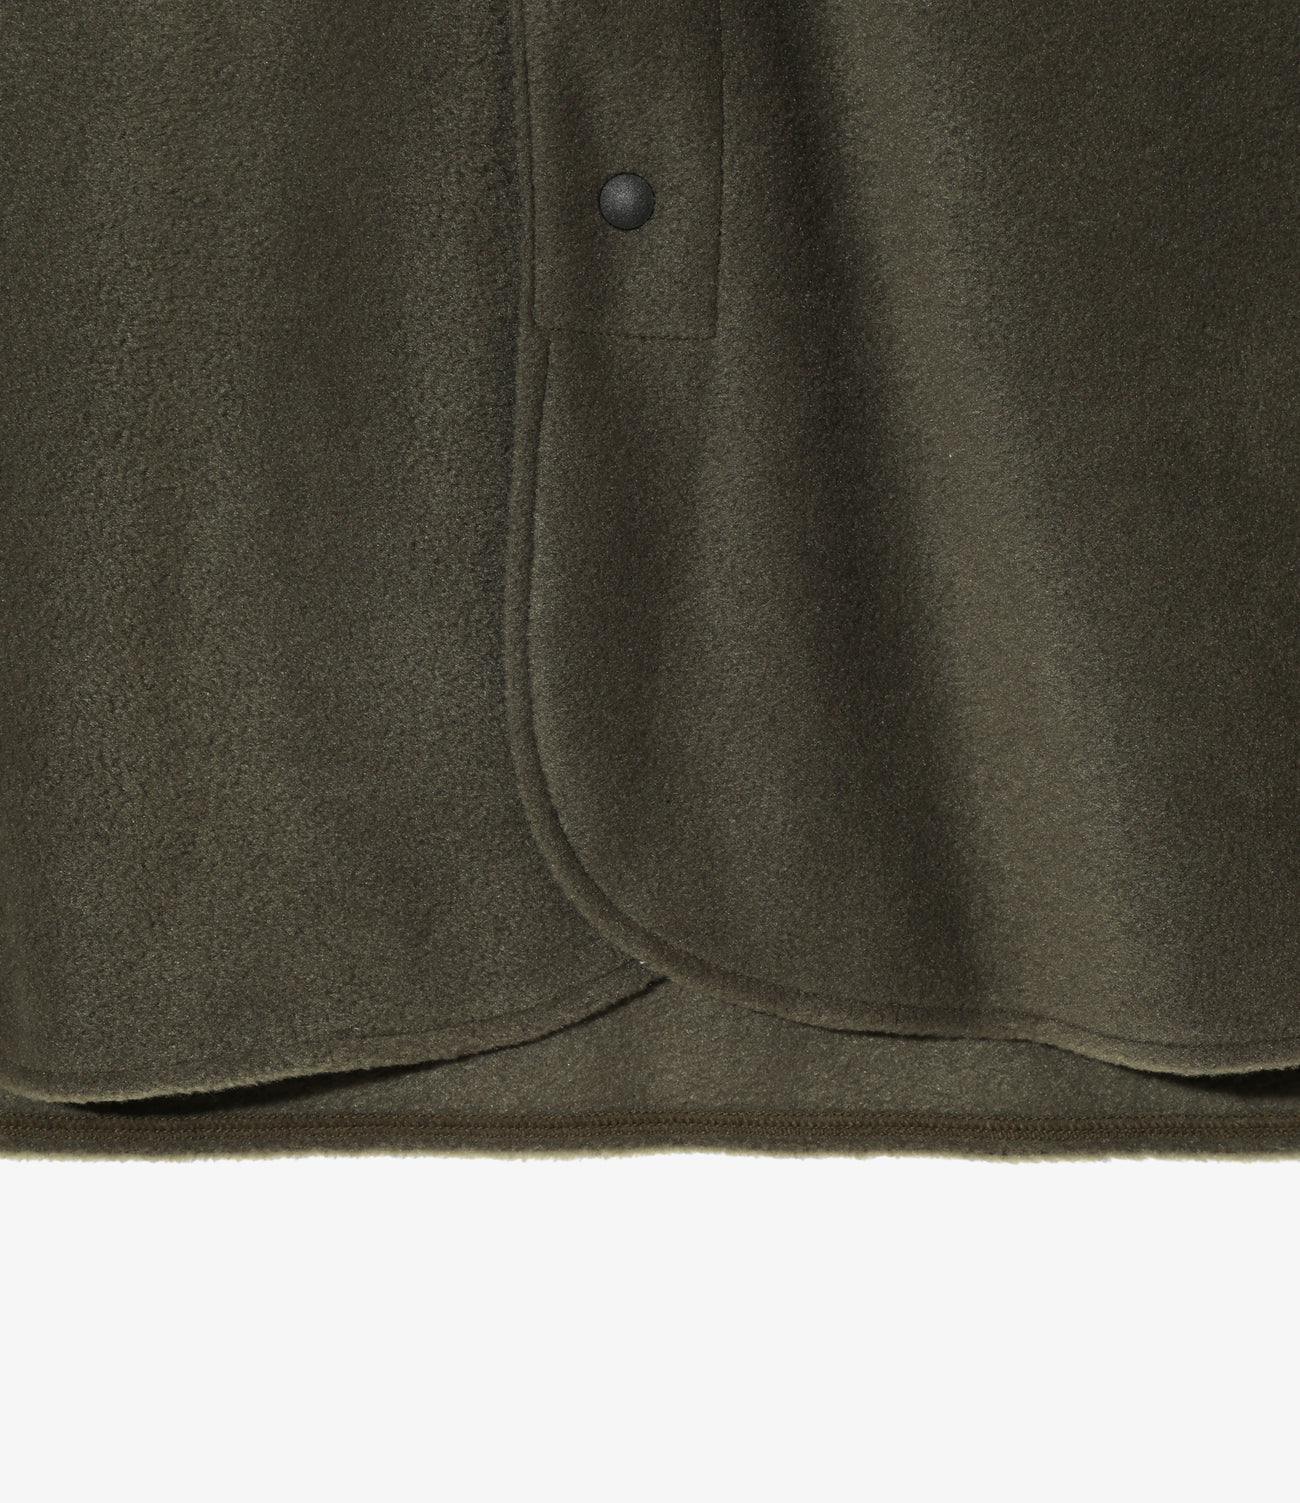 Scouting Shirt - Olive - Poly Fleece